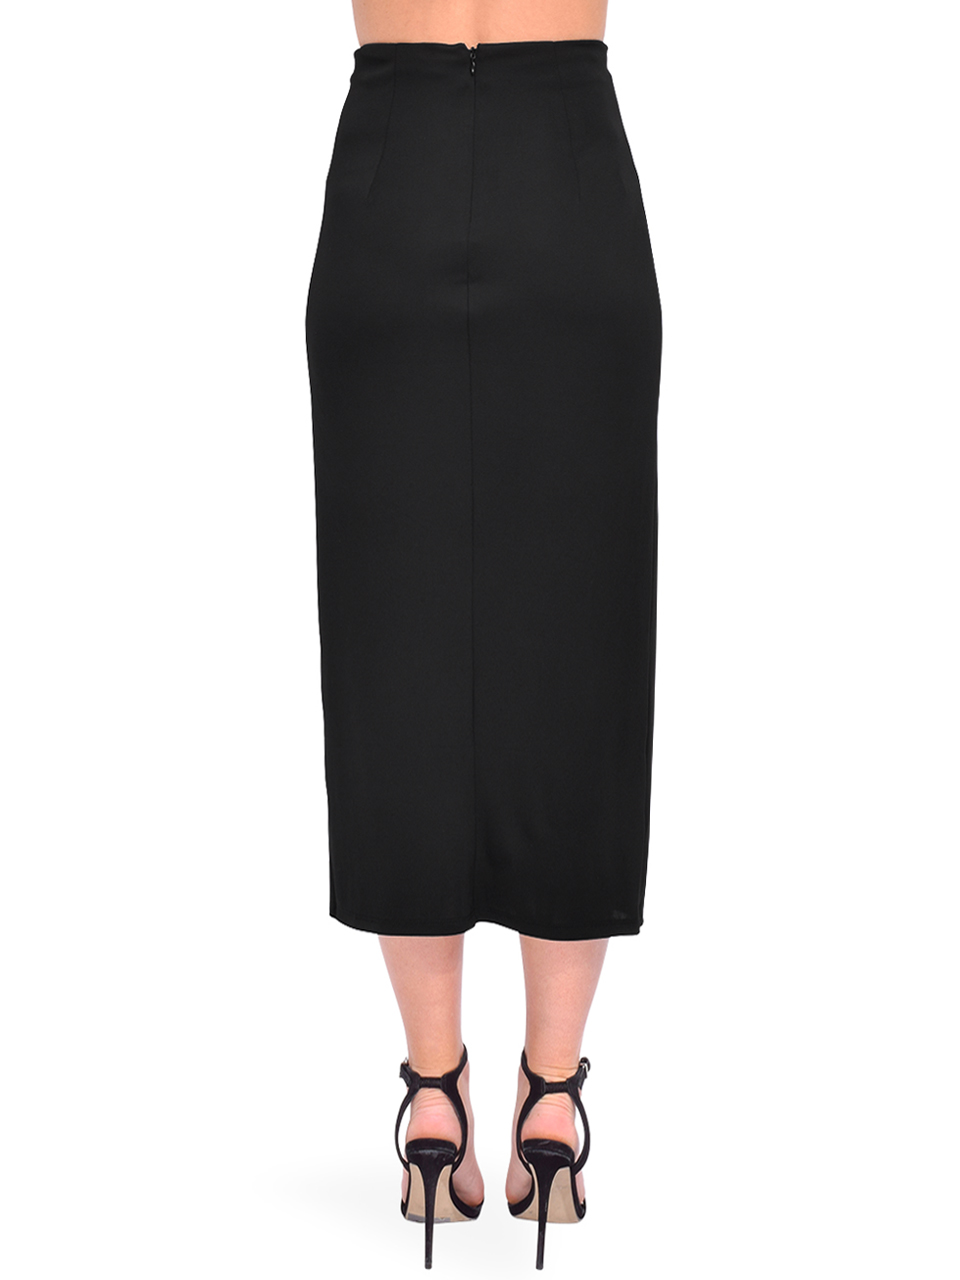 Cinq a Sept Vallory Draped Jersey Midi Skirt in Black Back View 